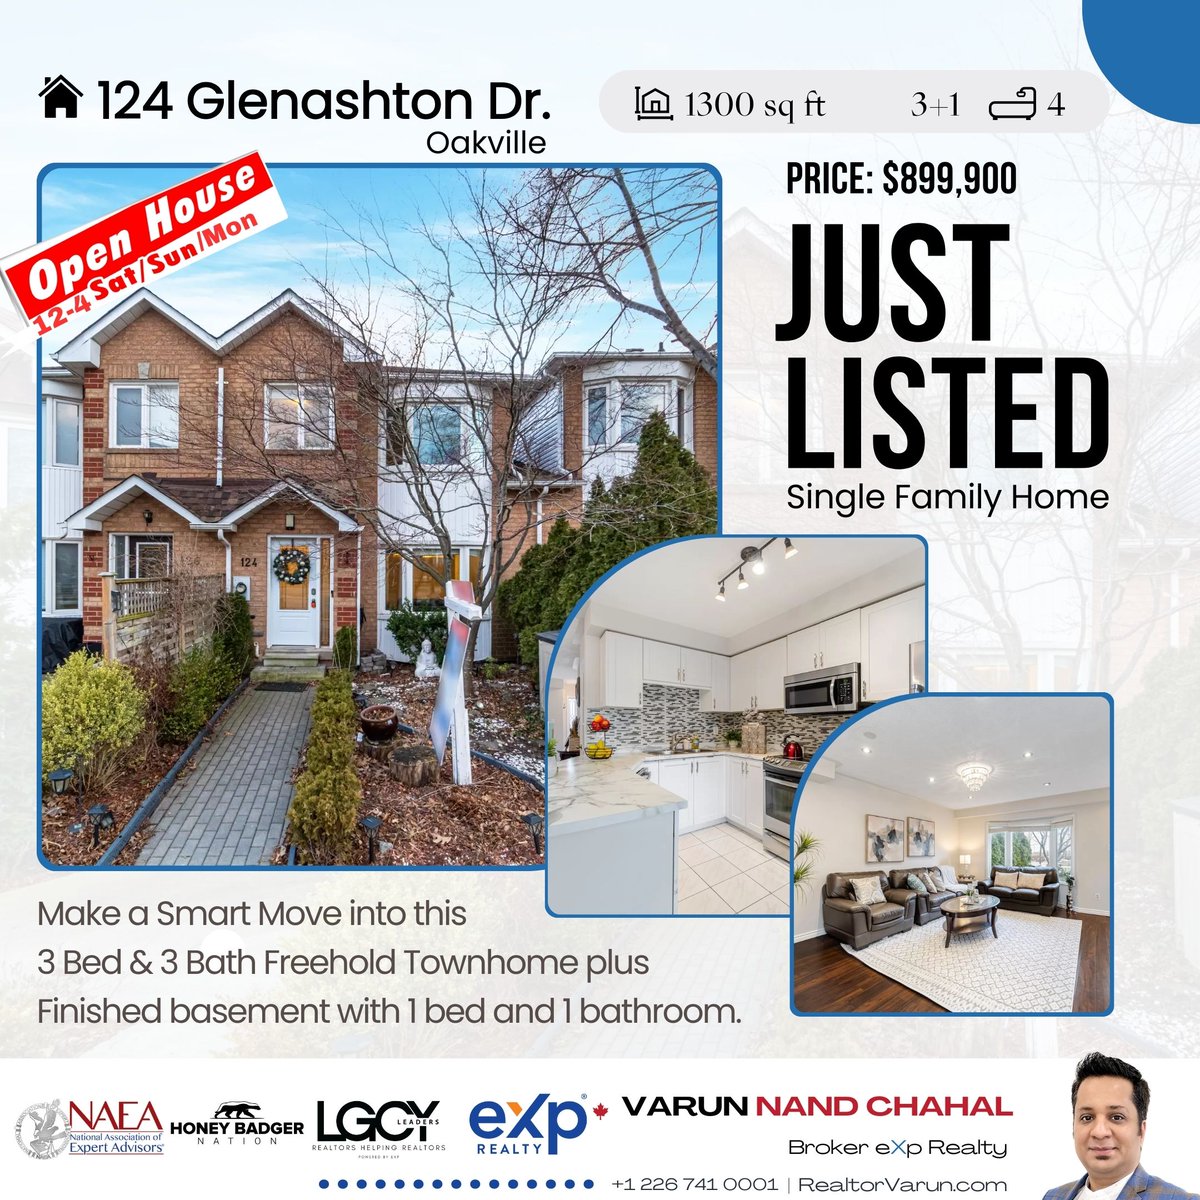 JUST LISTED!
124 Glenashton Dr, Oakville 
Contact me now to book an exclusive showing!

3+1 Bed, 3+ 1 Bath
1300 Sqft, 2 Storey 
2 Car Parking
High rating Schools, Elite Neighbourhood

#JUSTLISTED #OAKVILLEREALESTATE #HOMEFORSALE #FIRSTTIMEBUYER #INVESTMENT  #INVESTINREALESTATE